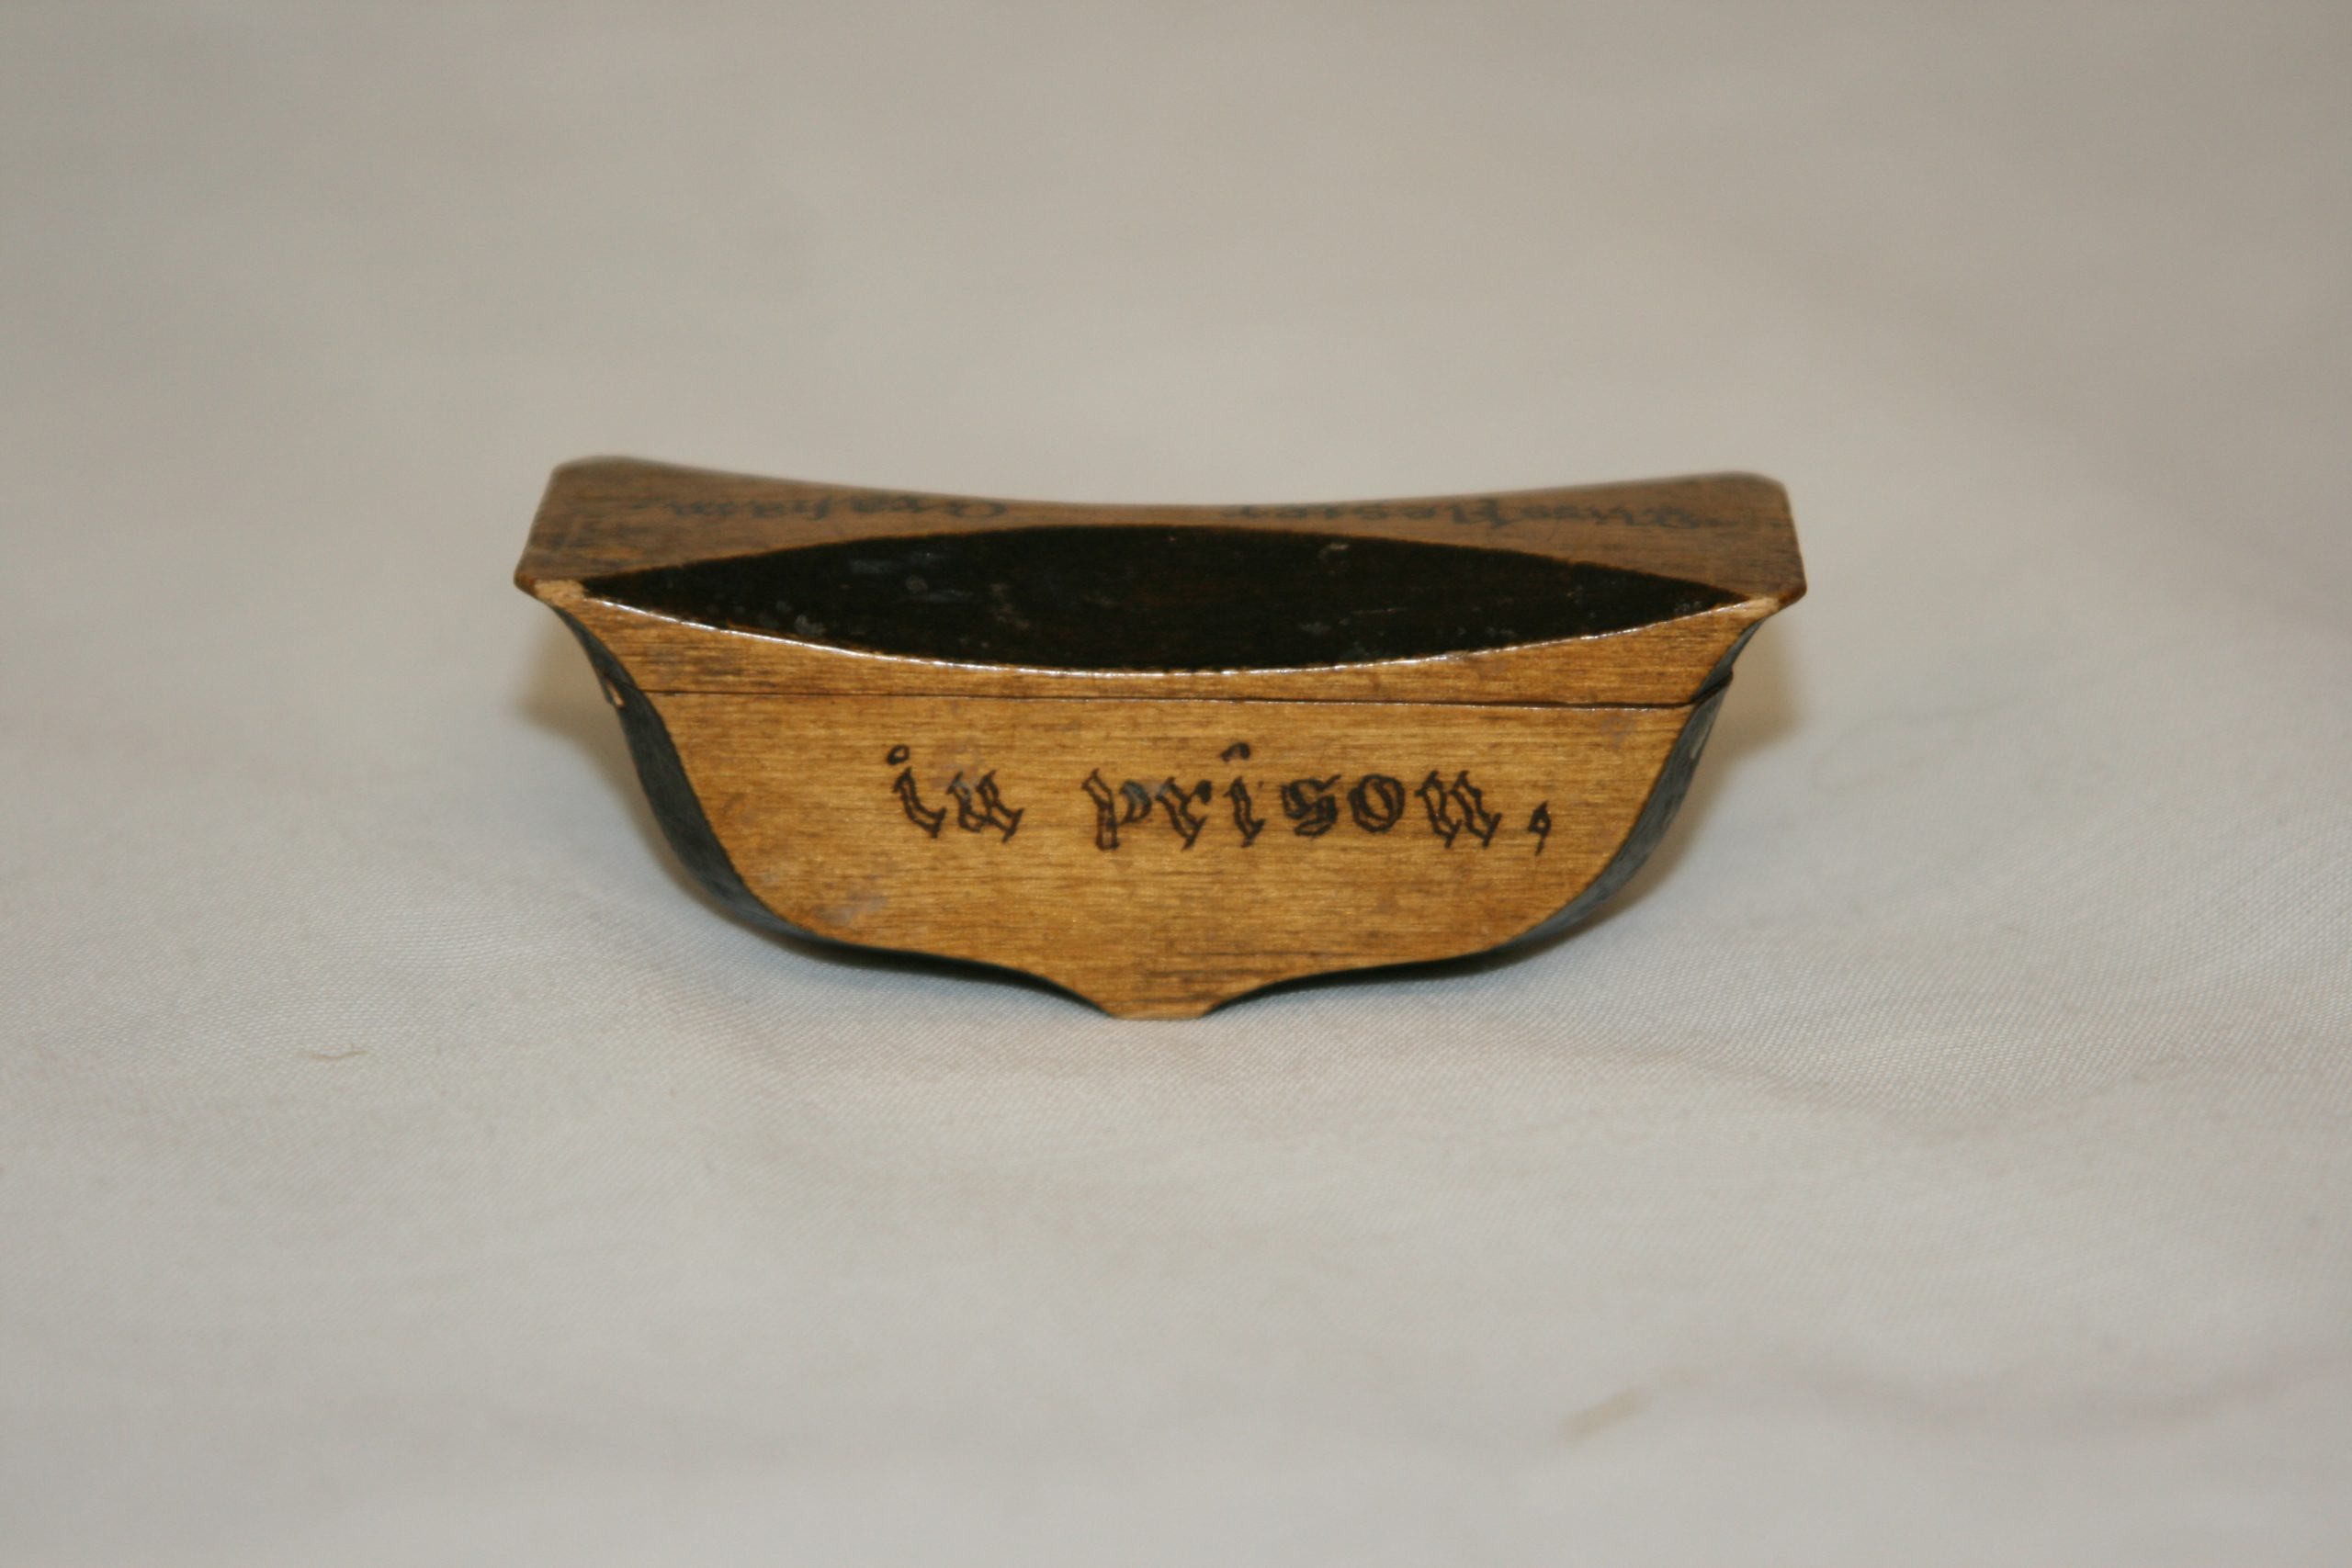 Rebellion box with black ink decor and a rocking bottom made by John Graham for his sister Miss Hester Graham.